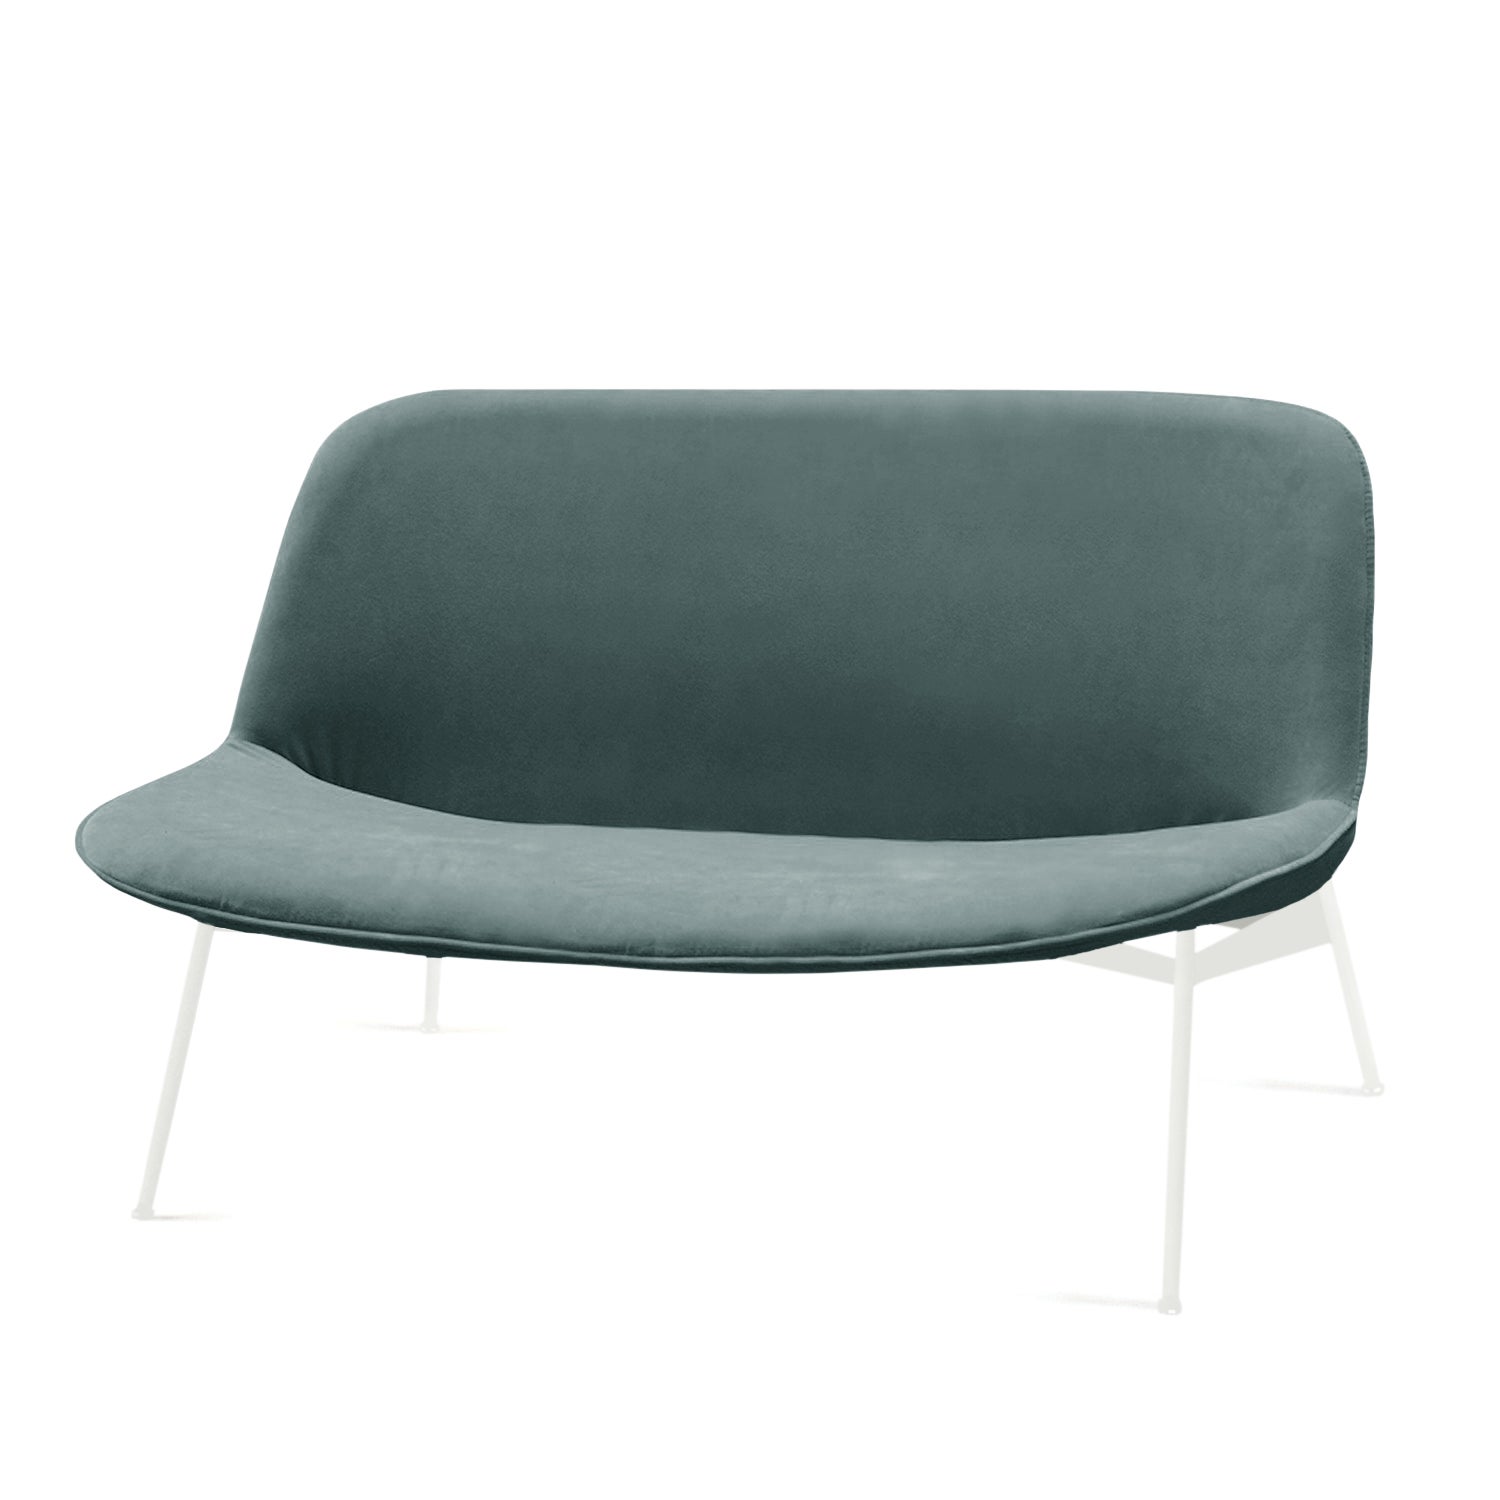 Chiado Sofa, Large with Teal and White For Sale